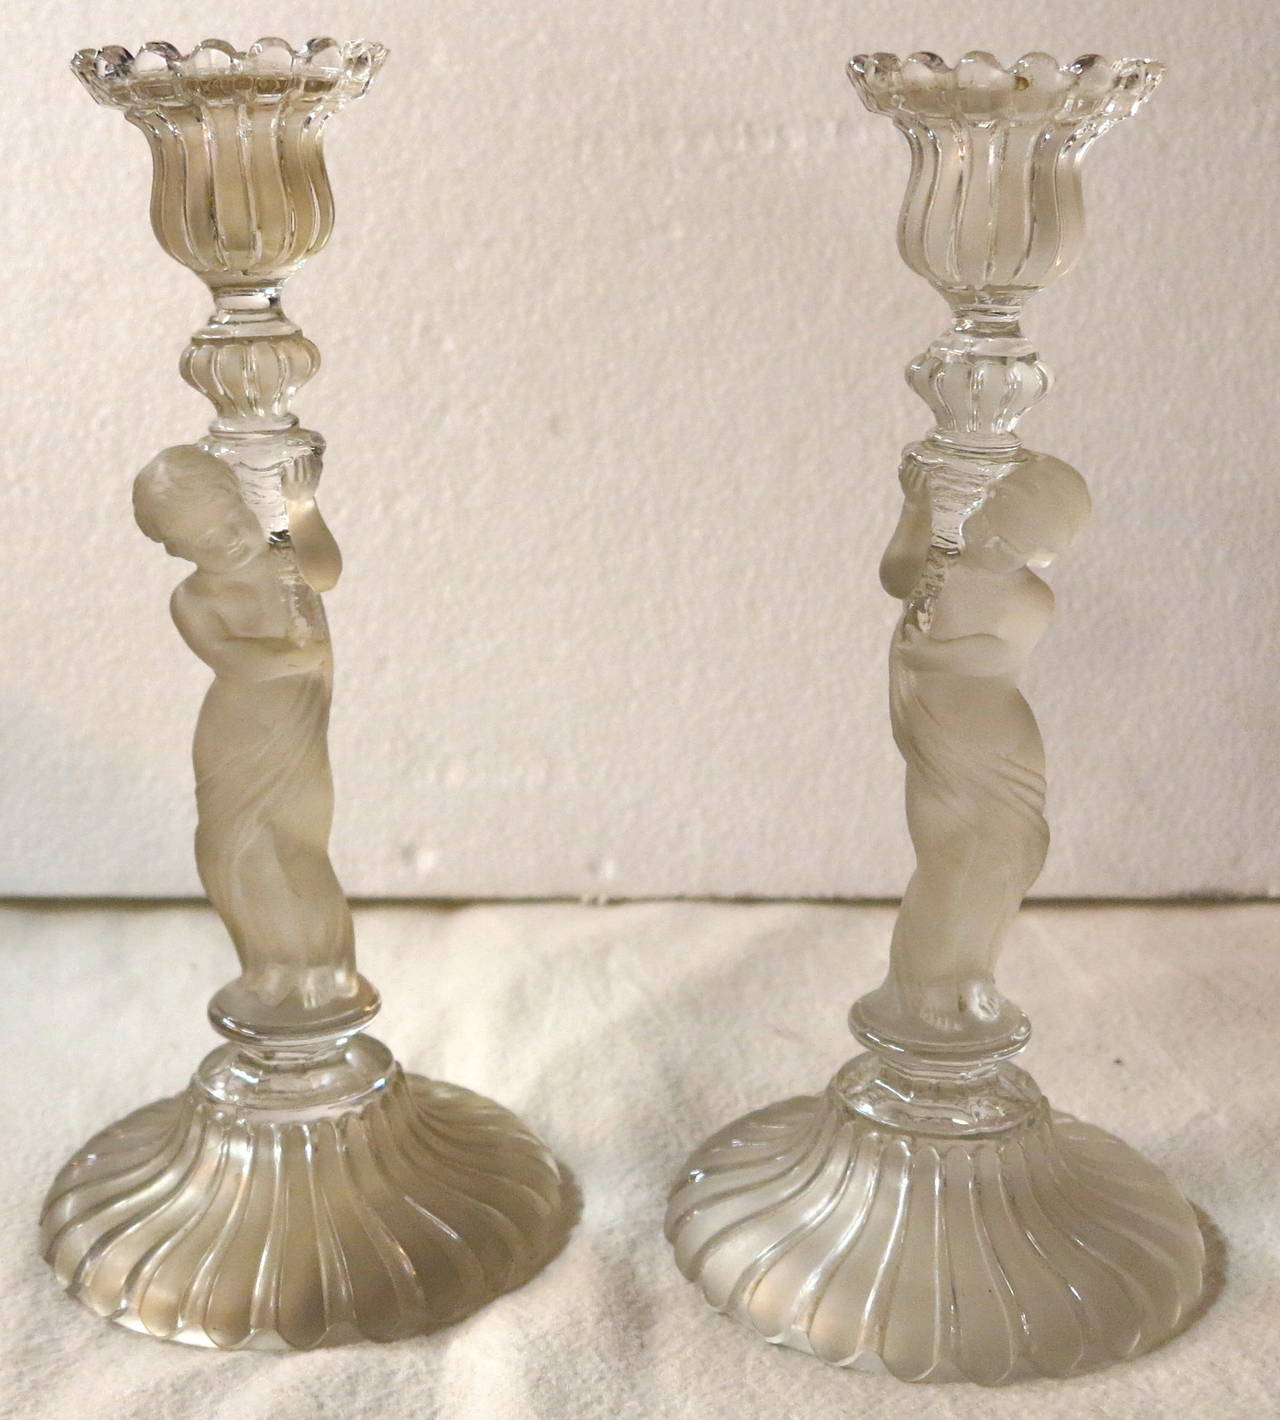 Pair of molded crystal signed pressed candlesticks Baccarat
Good condition, circa on 1950